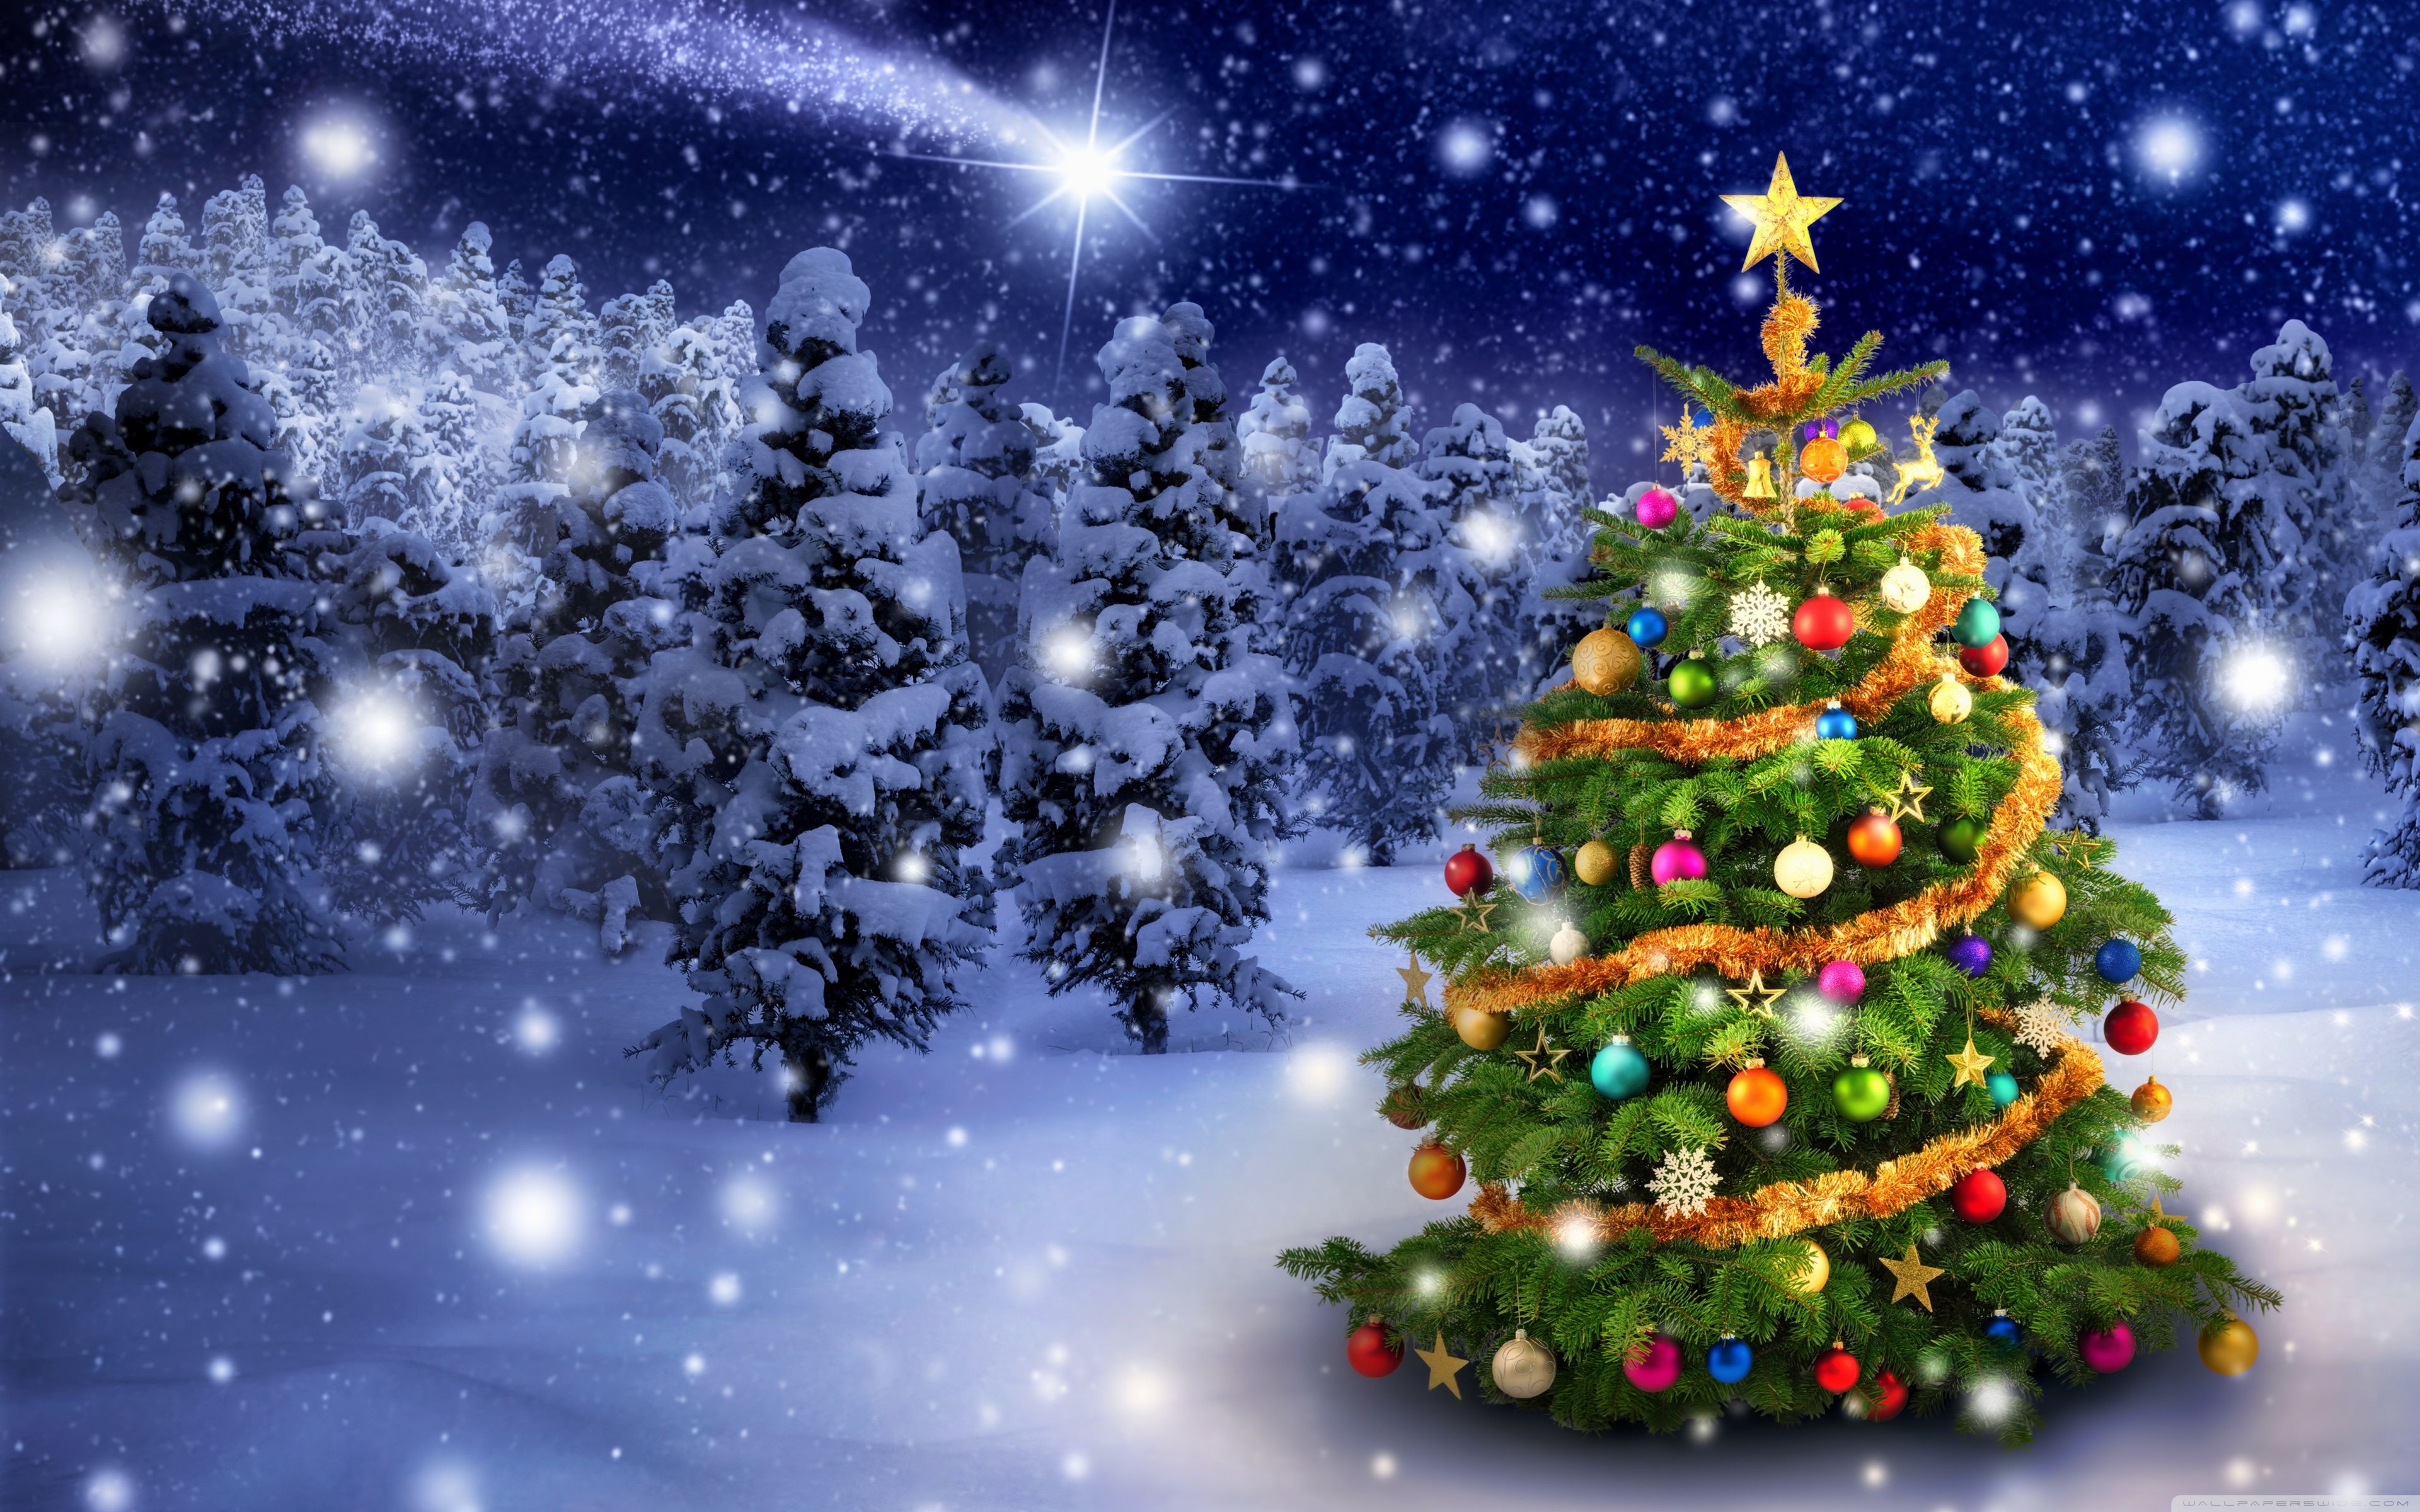 Awesome Background Christmas Scene Wallpaper HD Photo